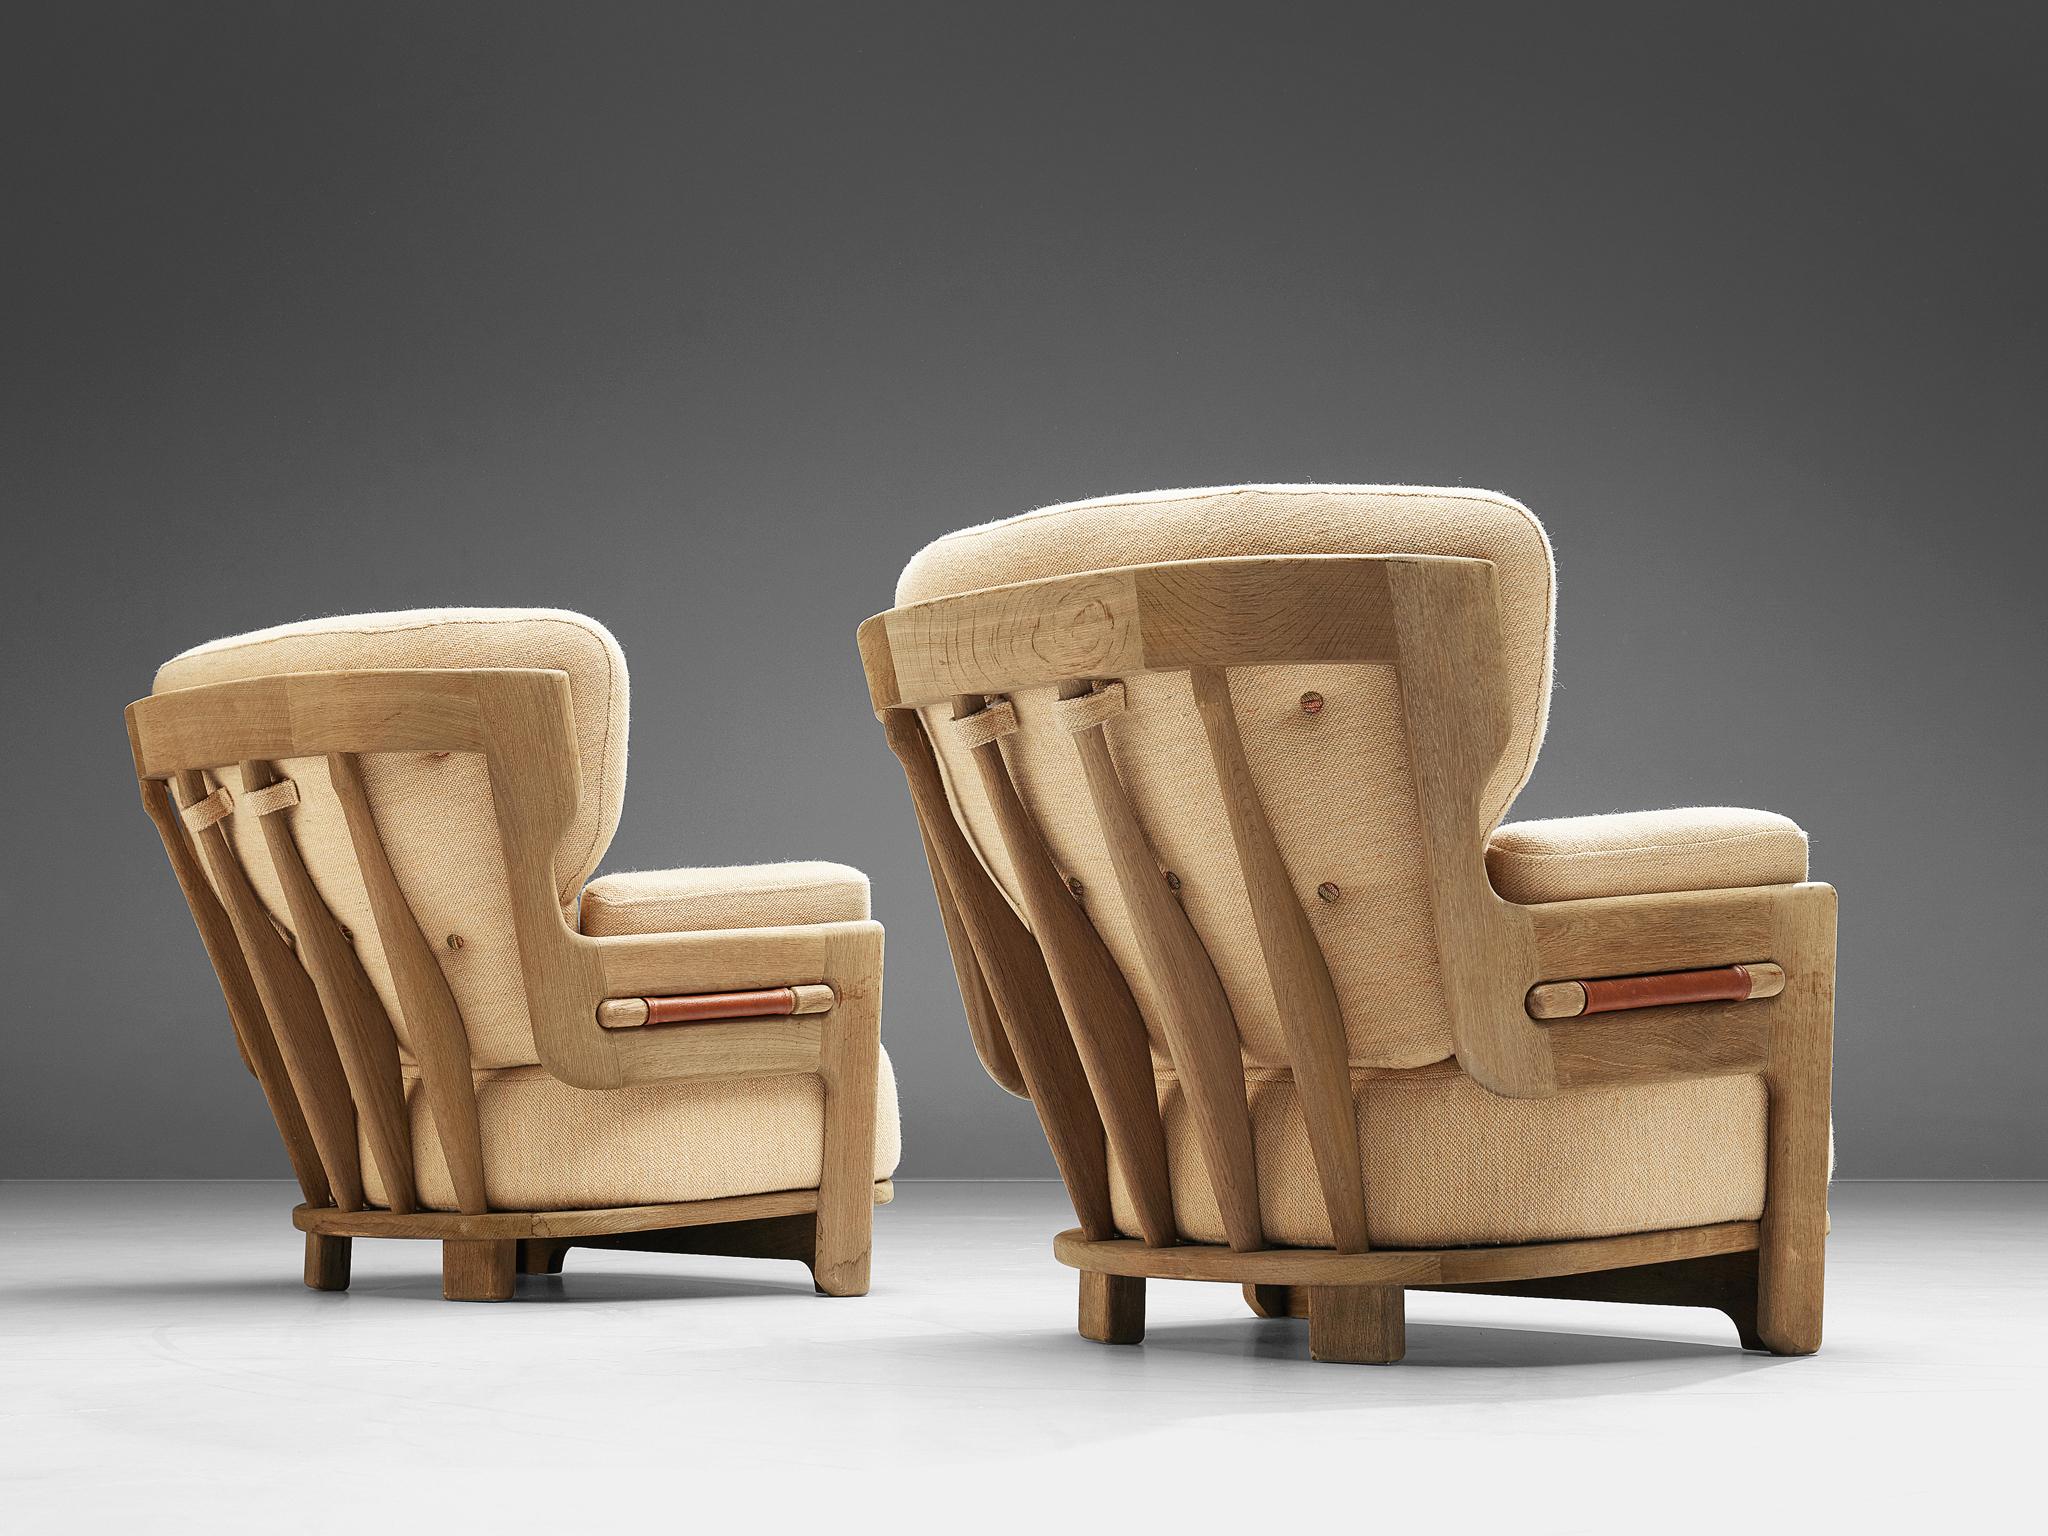 Guillerme & Chambron for Votre Maison, set of two 'Denis' lounge chairs, fabric and oak, France, 1960s.

Set of two extraordinary Guillerme and Chambron lounge chairs in solid oak with the typical characteristic decorative details at the back and